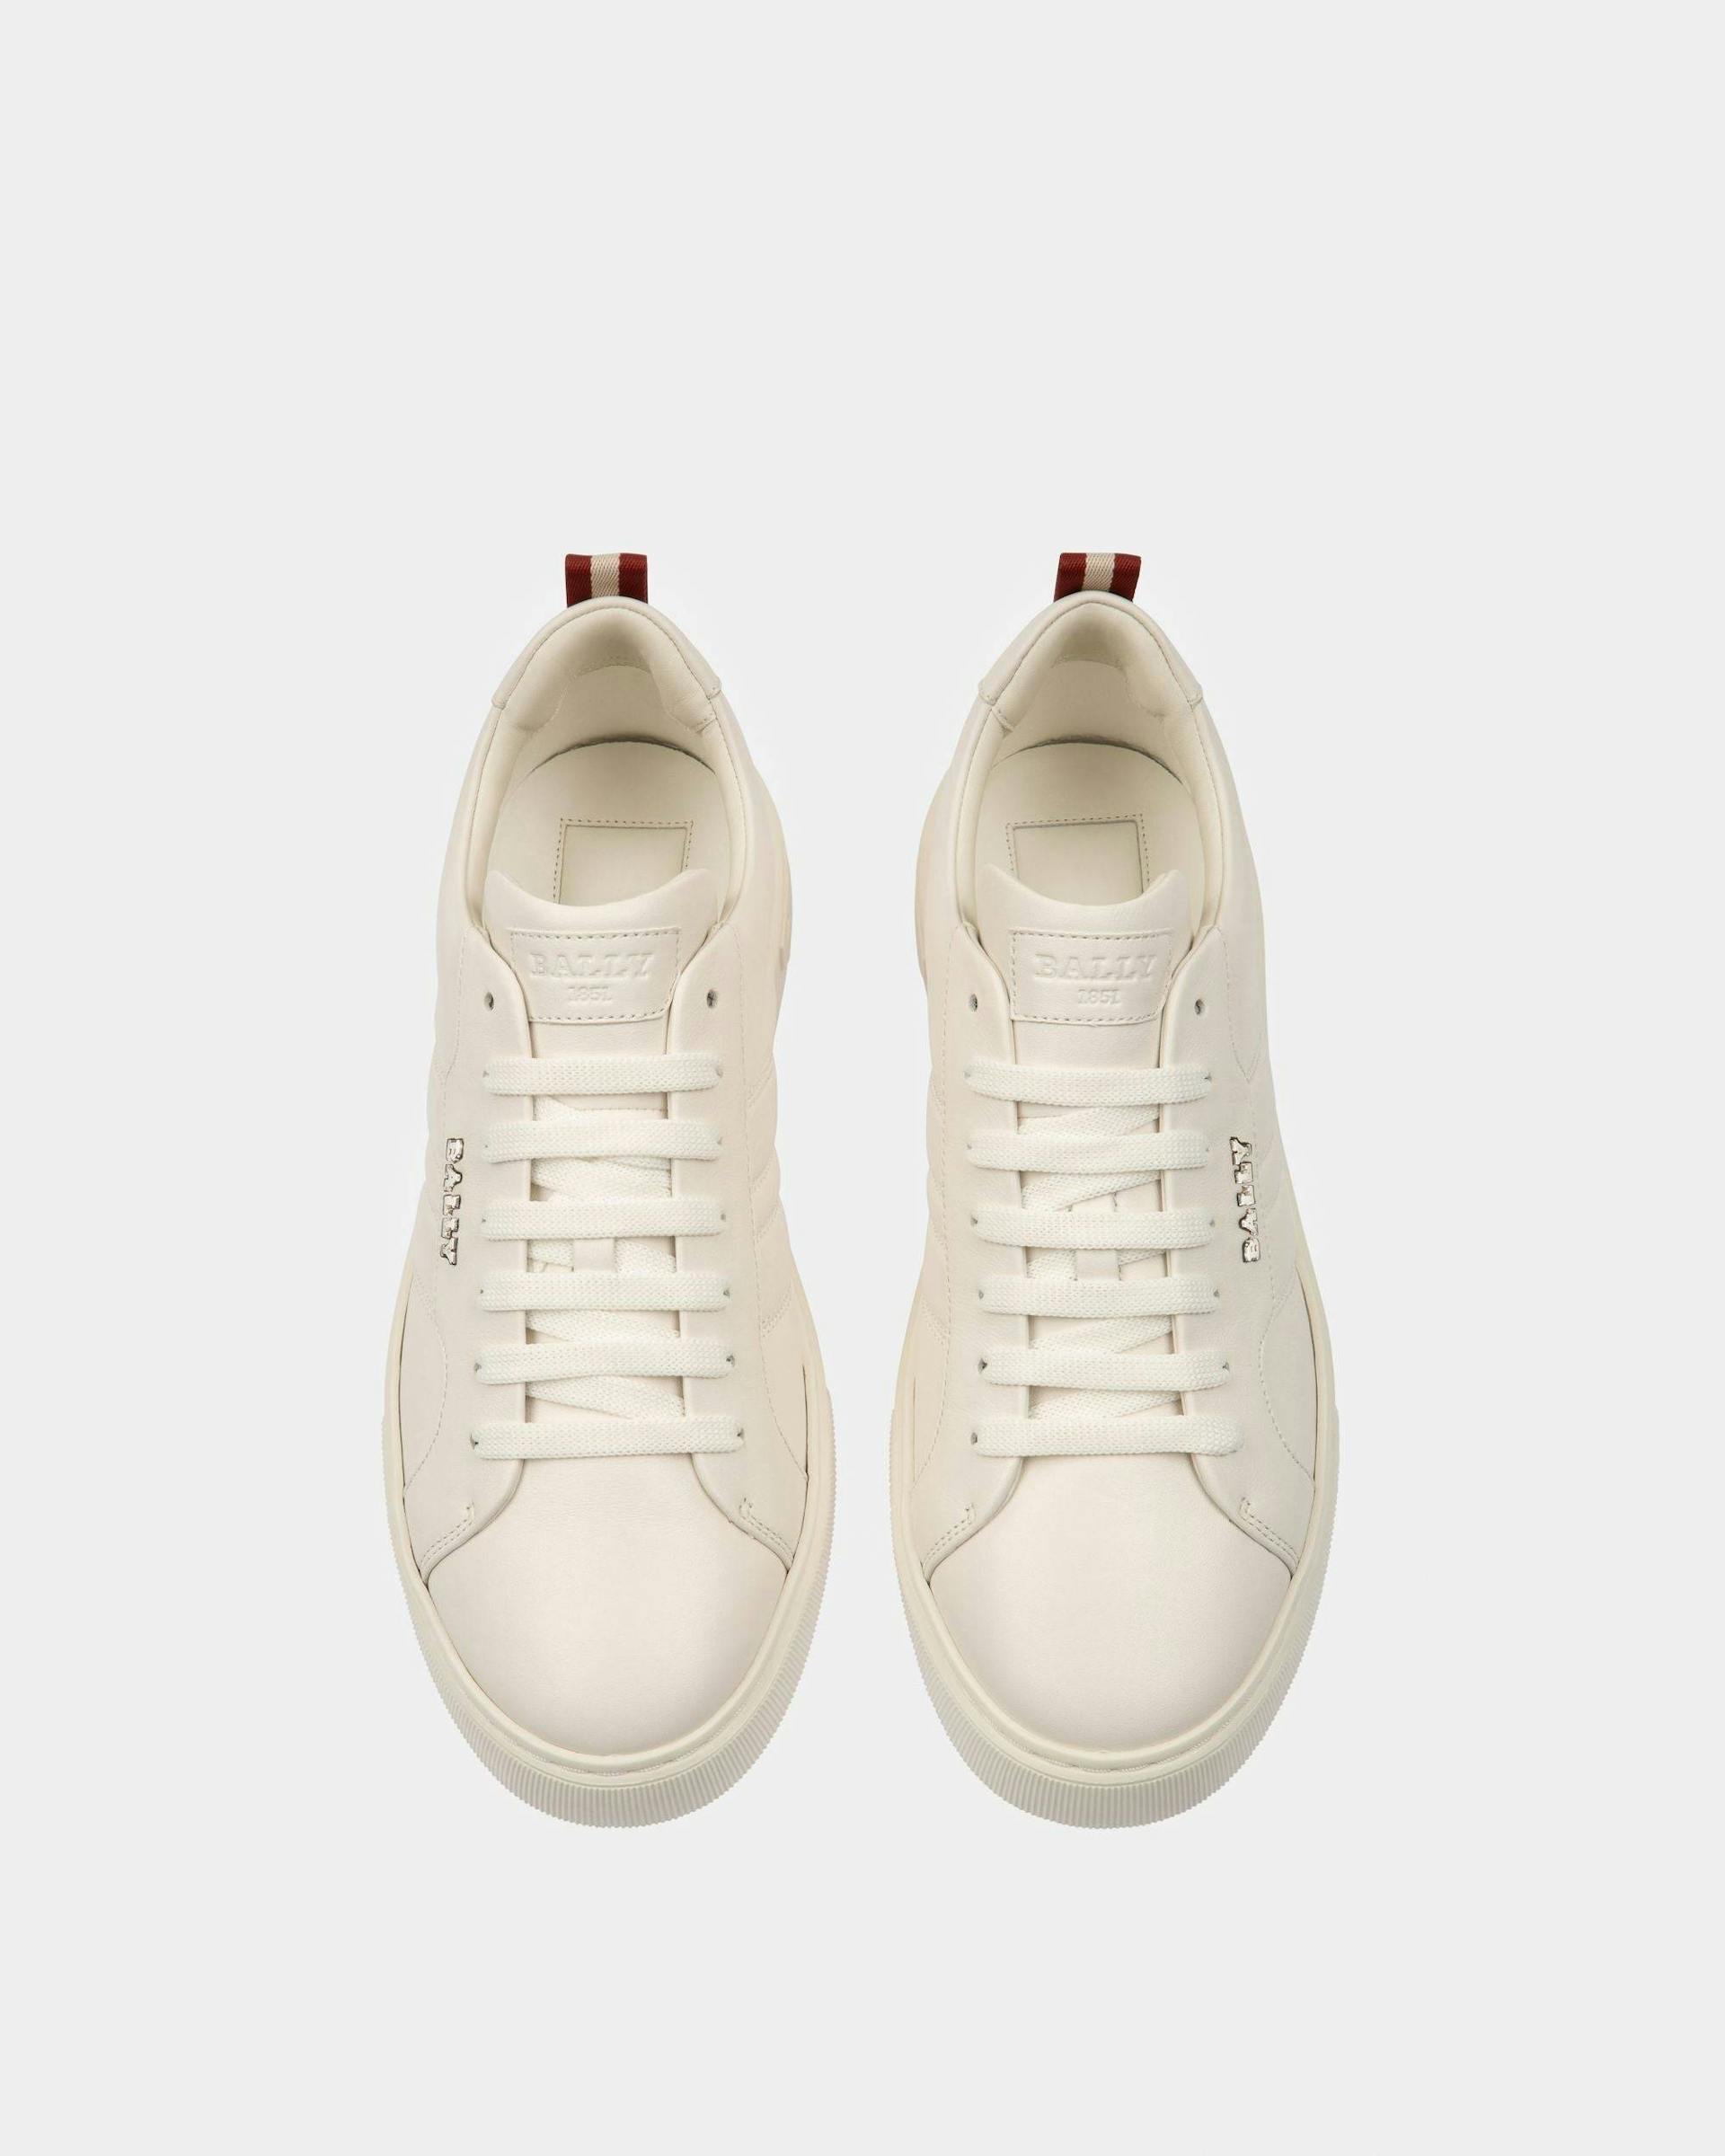 Maxim Leather Sneakers In White - Men's - Bally - 02